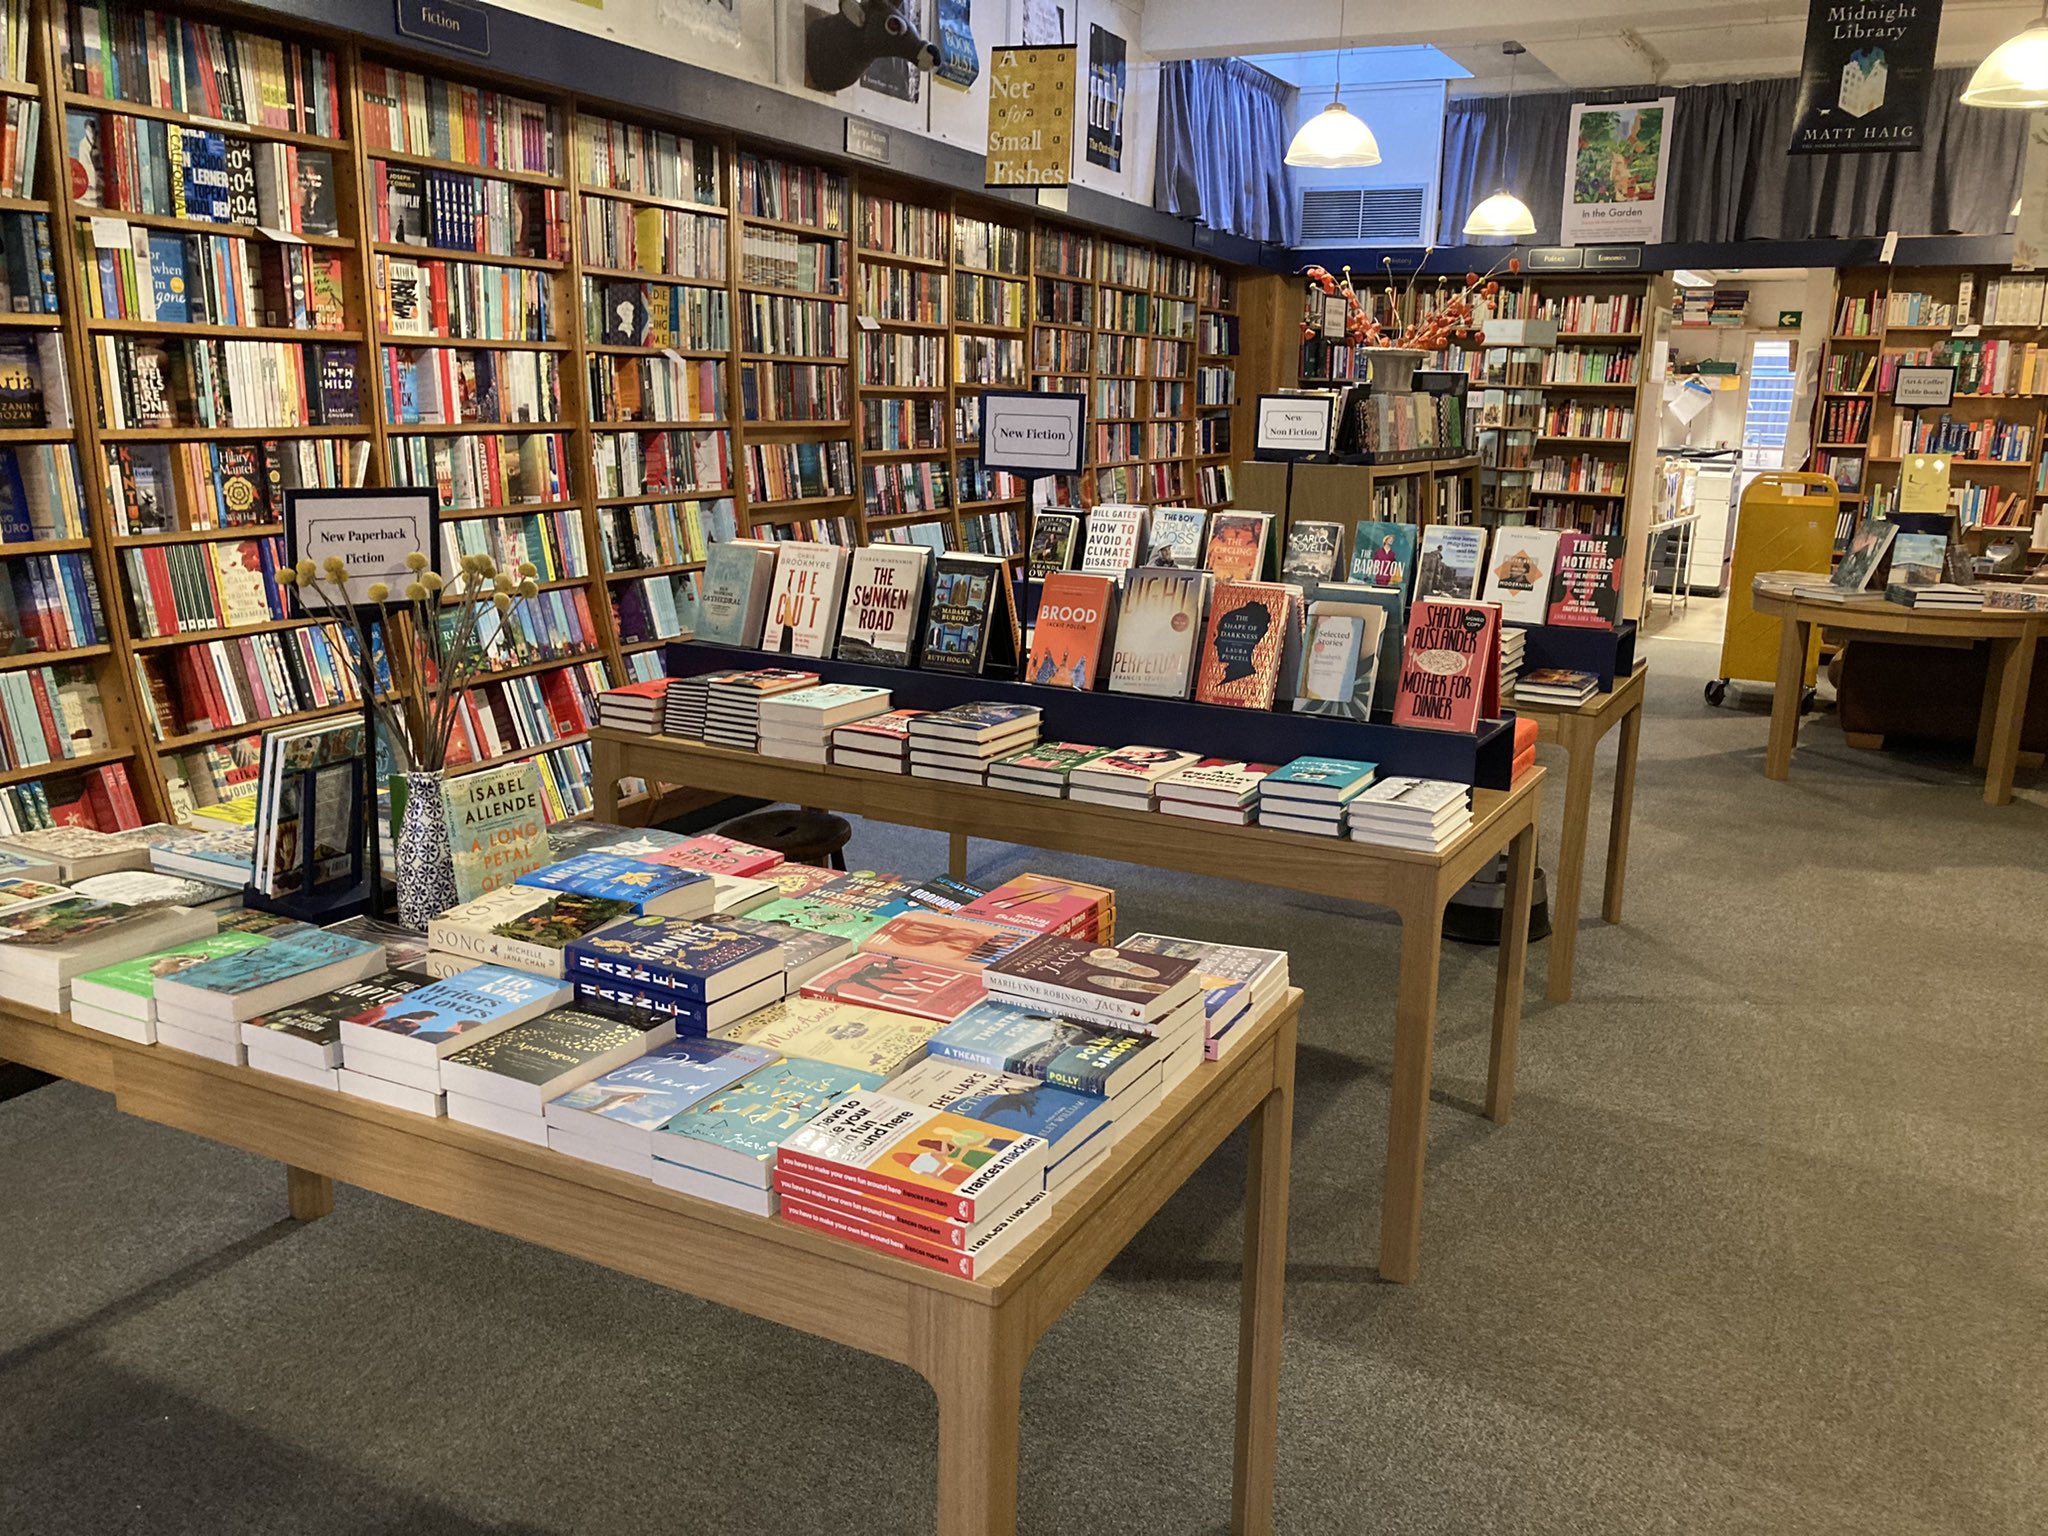 Sevenoaks Bookshop on X: Just one more sleep!! The bookshop is primed and  ready to welcome you all back - stuffed full of sensational books just  waiting to be chosen and read